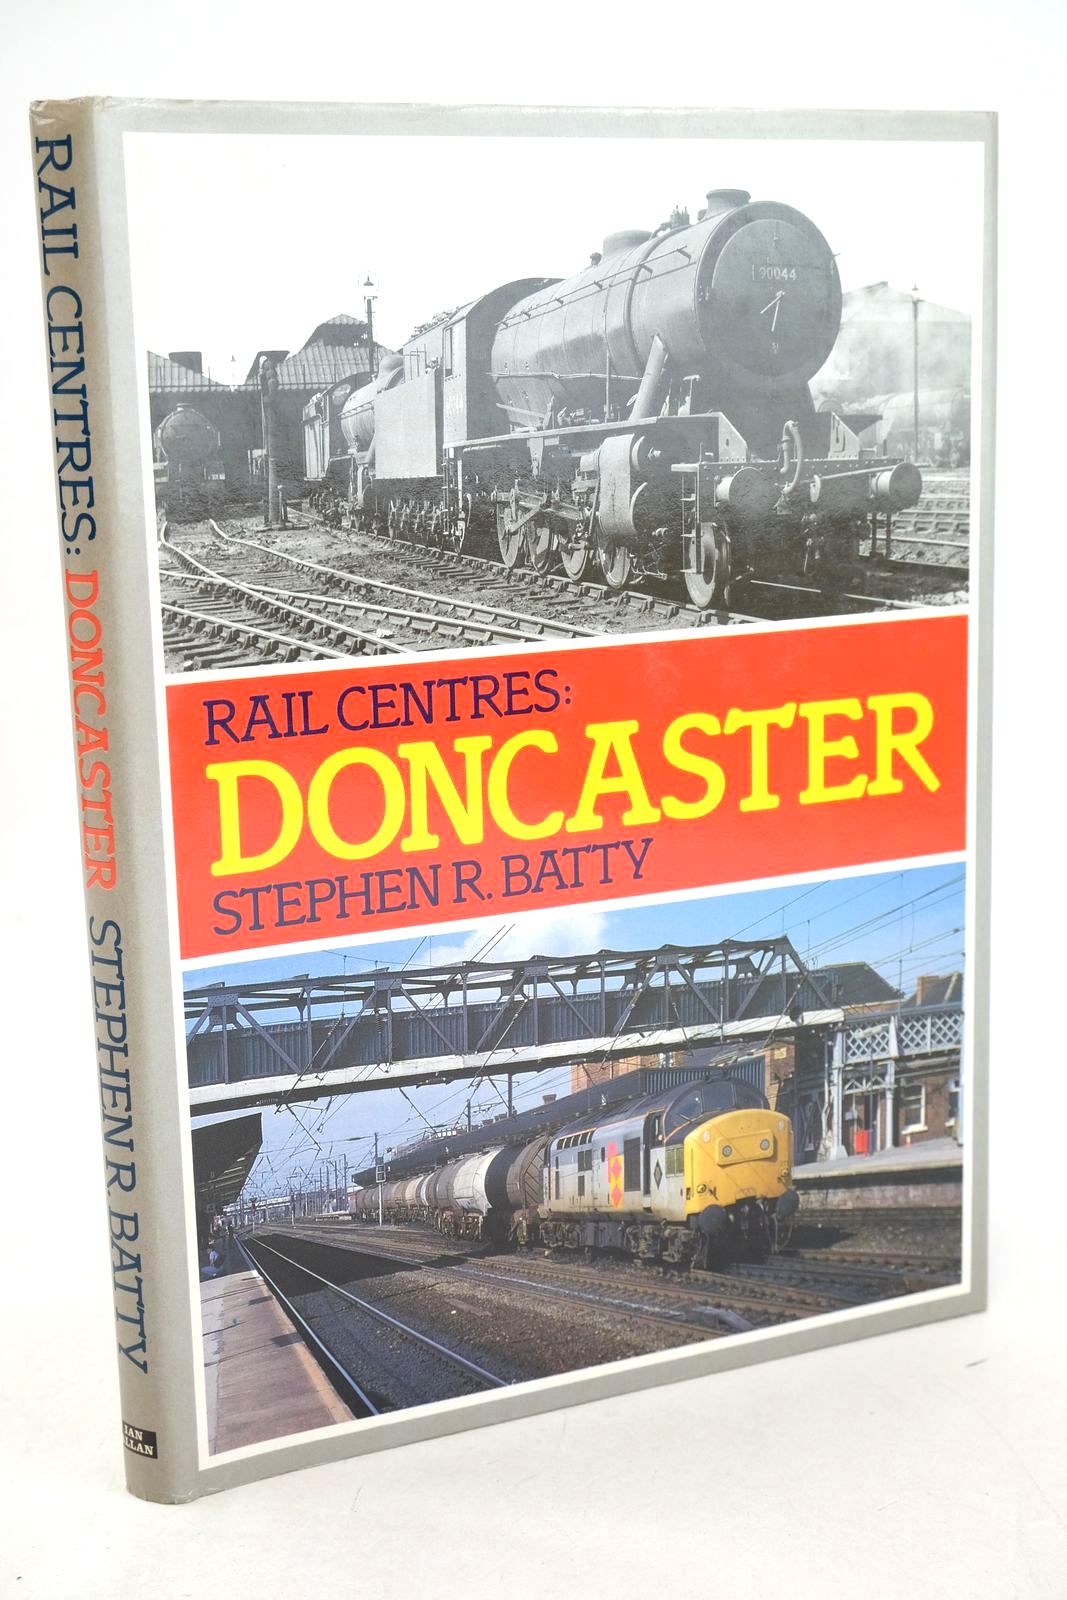 Photo of RAIL CENTRES: DONCASTER written by Batty, Stephen R. published by Ian Allan Ltd. (STOCK CODE: 1327448)  for sale by Stella & Rose's Books